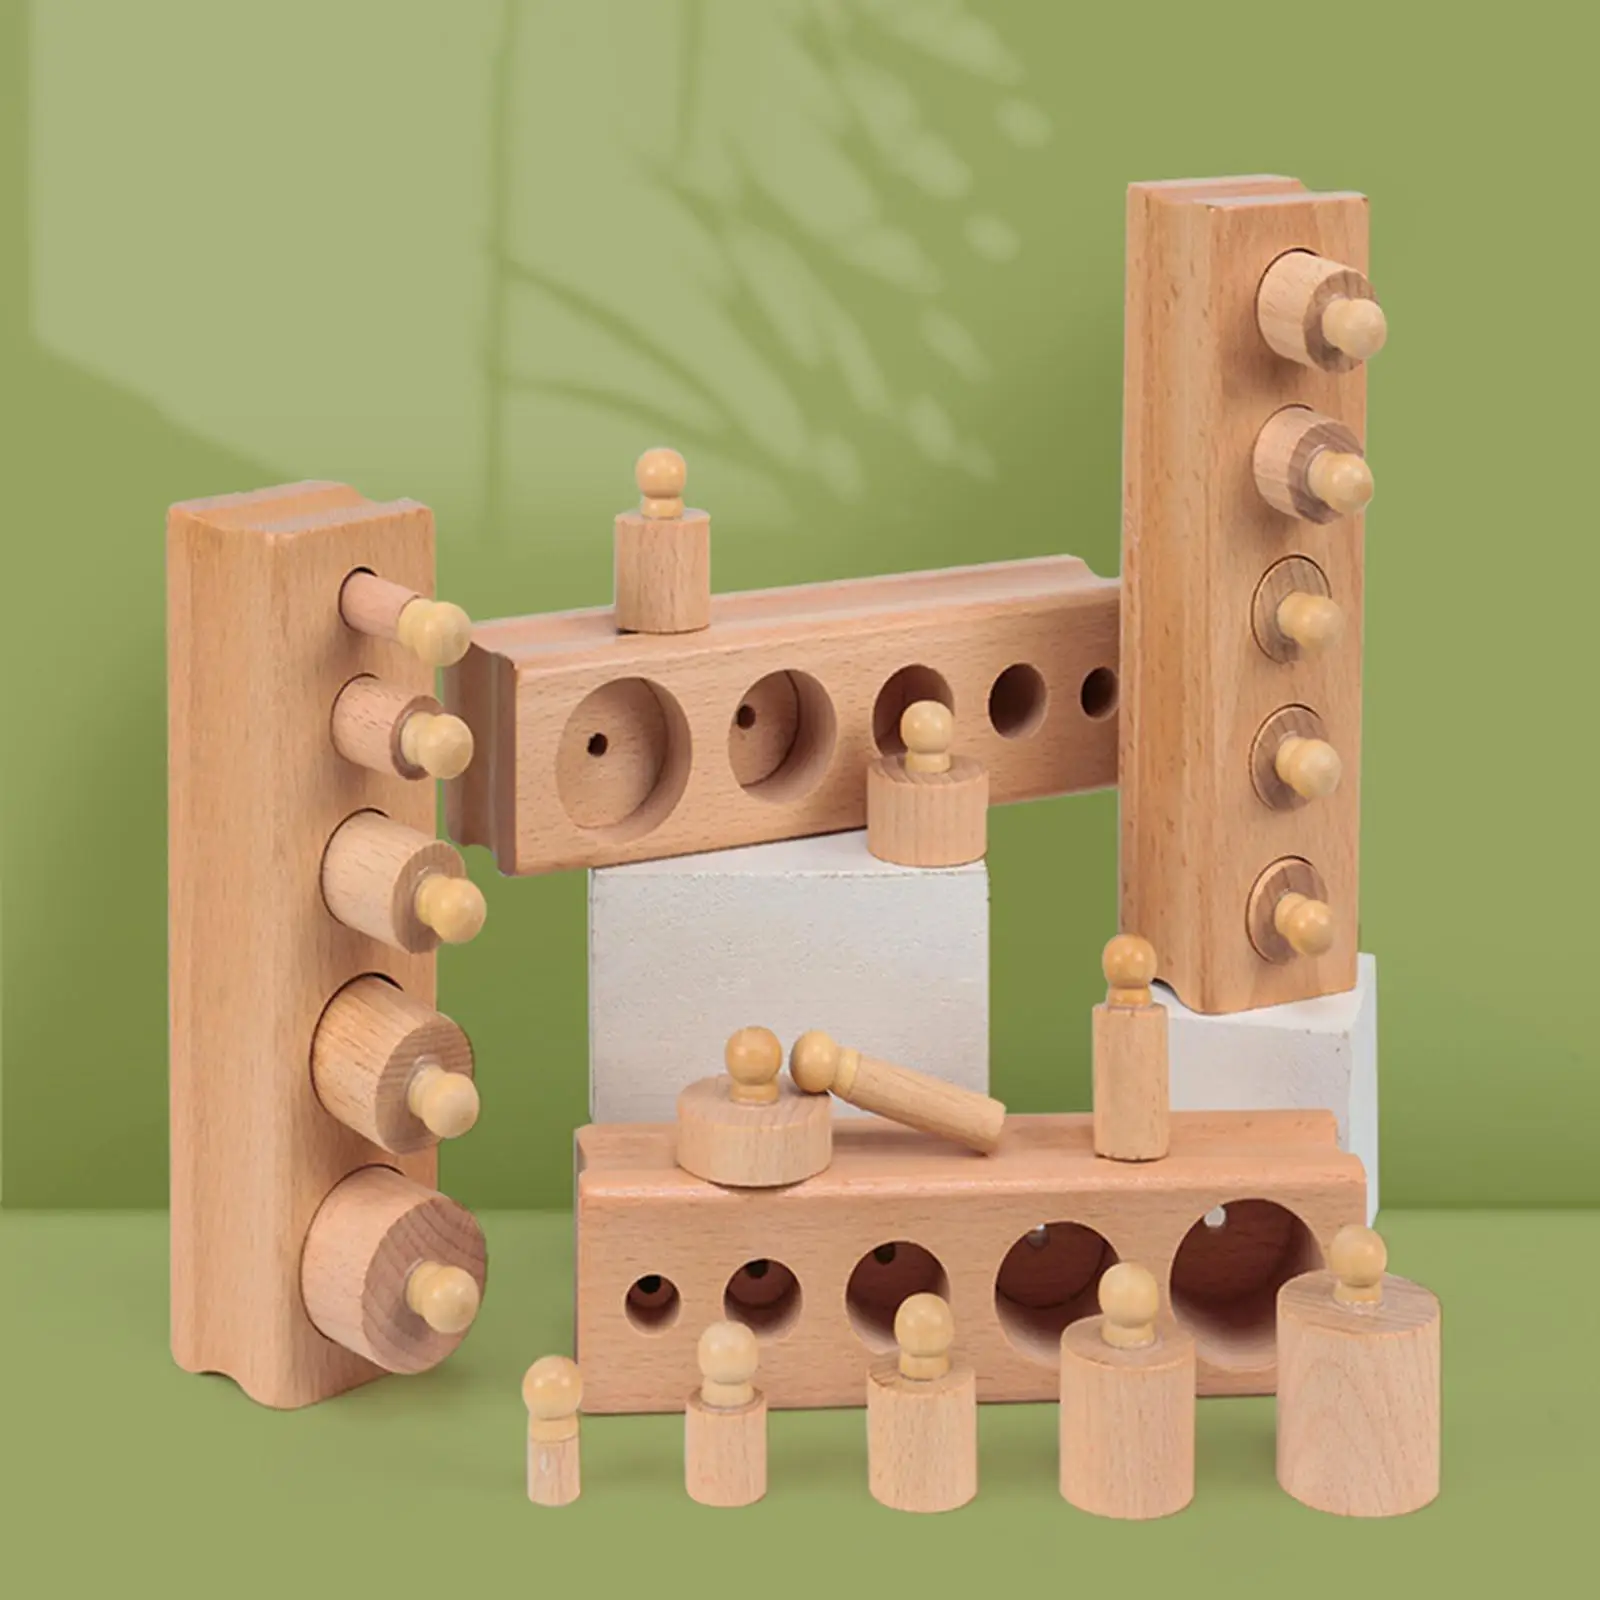 4Pcs Montessori Toy Board Game Early Development Knobbed Cylinders Blocks Socket Wooden Cylinders Ladder Blocks for School Baby